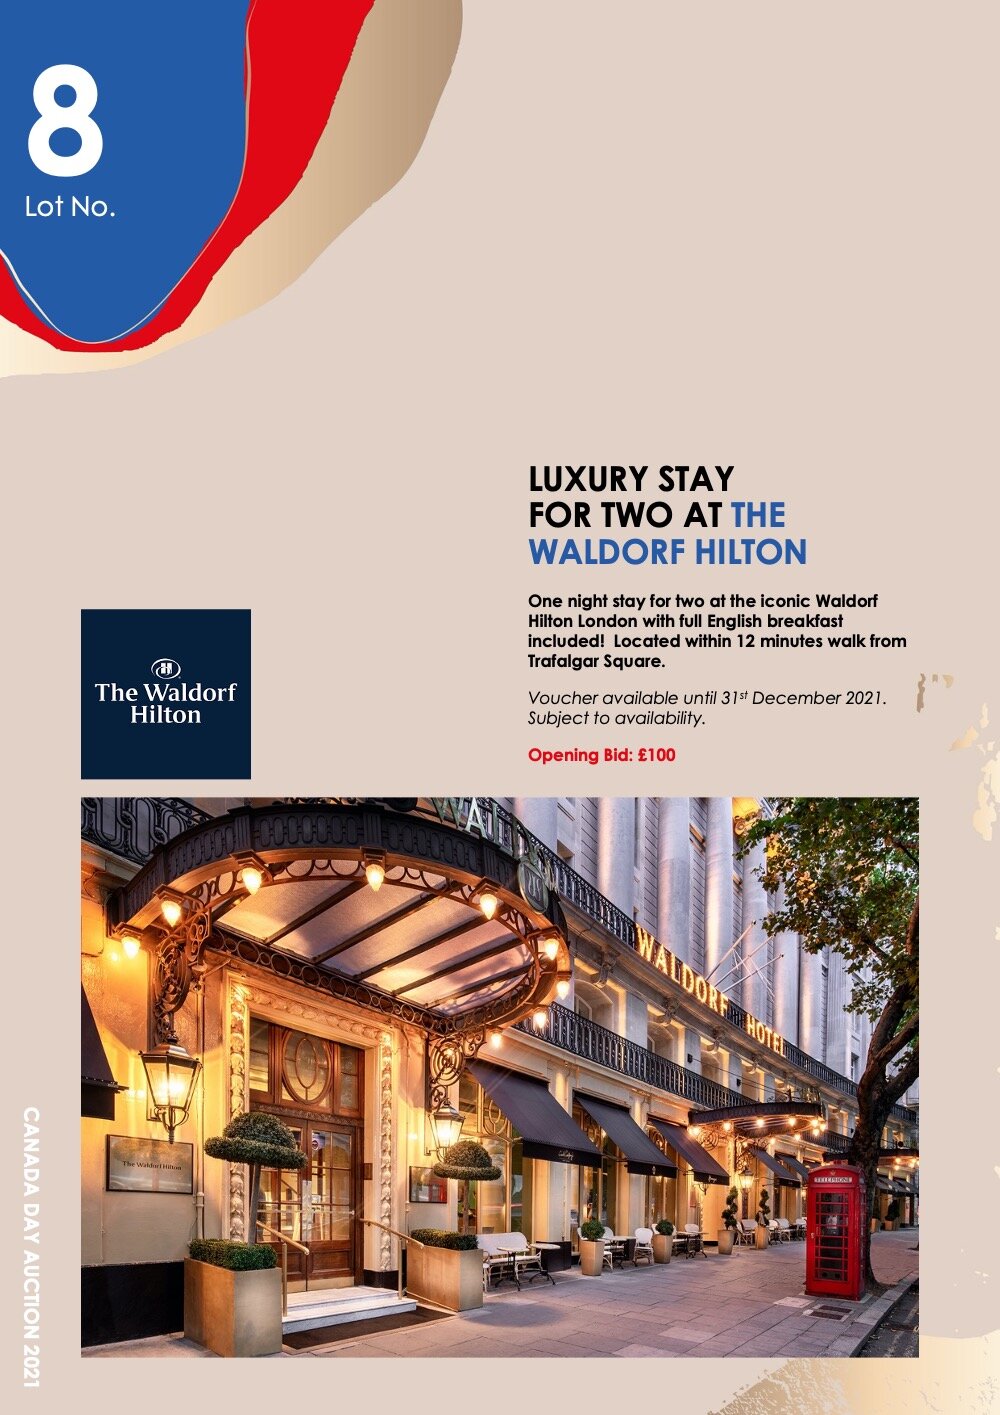  Lot 8:  LUXURY STAY  FOR TWO AT THE WALDORF HILTON     One night stay for two at the iconic Waldorf Hilton London with full English breakfast included! Located within 12 minutes walk from Trafalgar Square.     Voucher available until 31st December 2